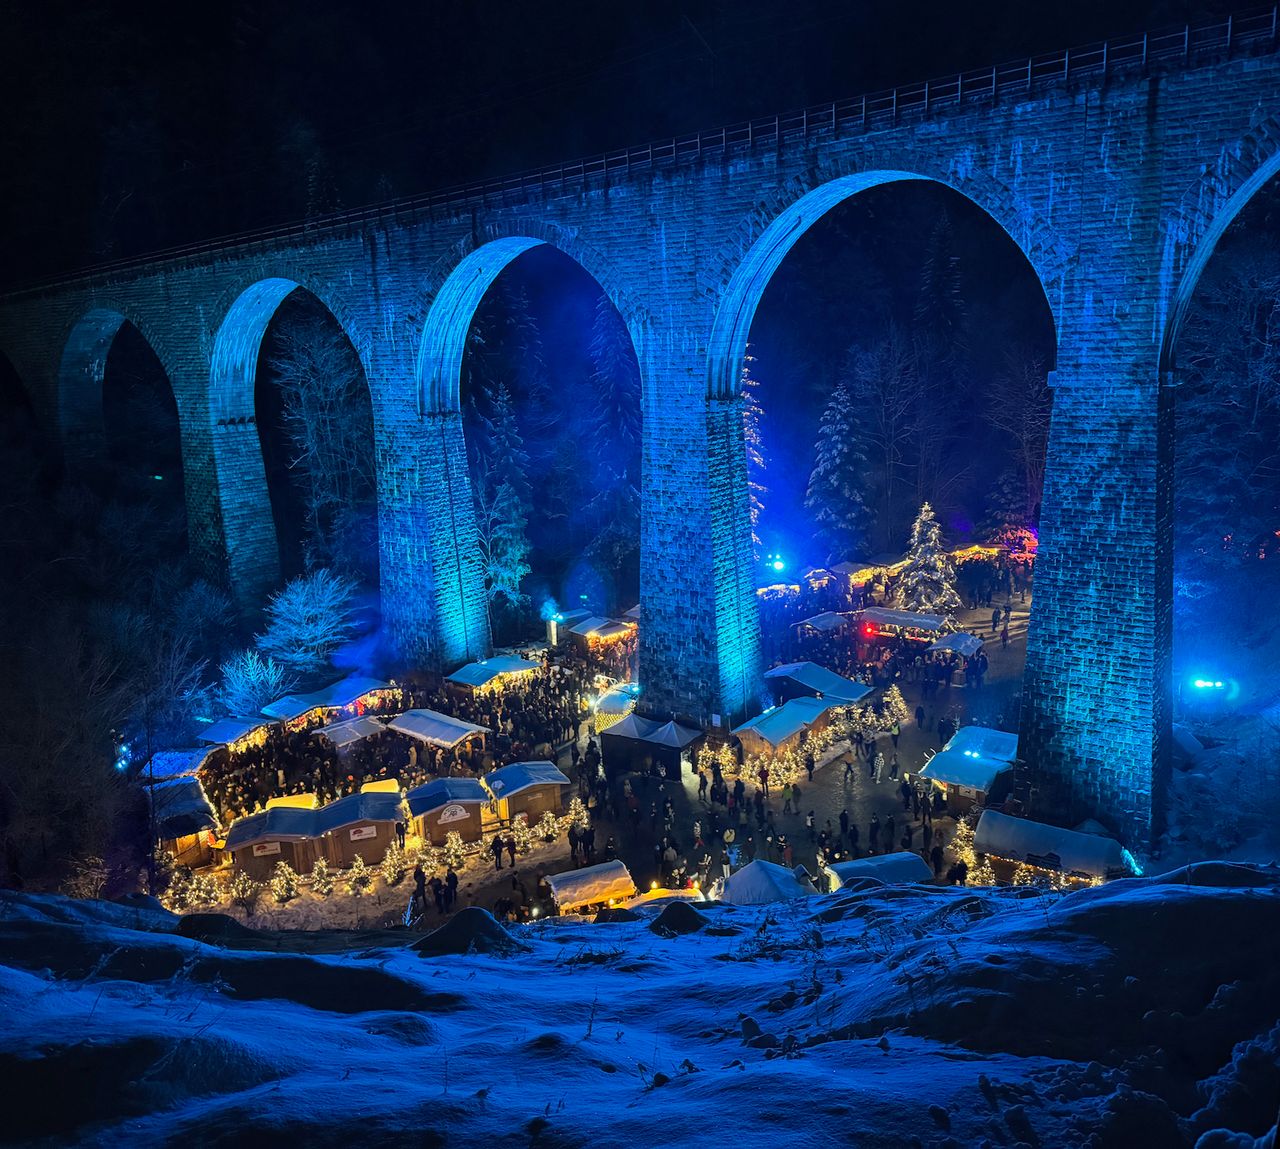 A Christmas market nestled under an old stone bridge spanning a valley, with everything lit up in blue floodlights.